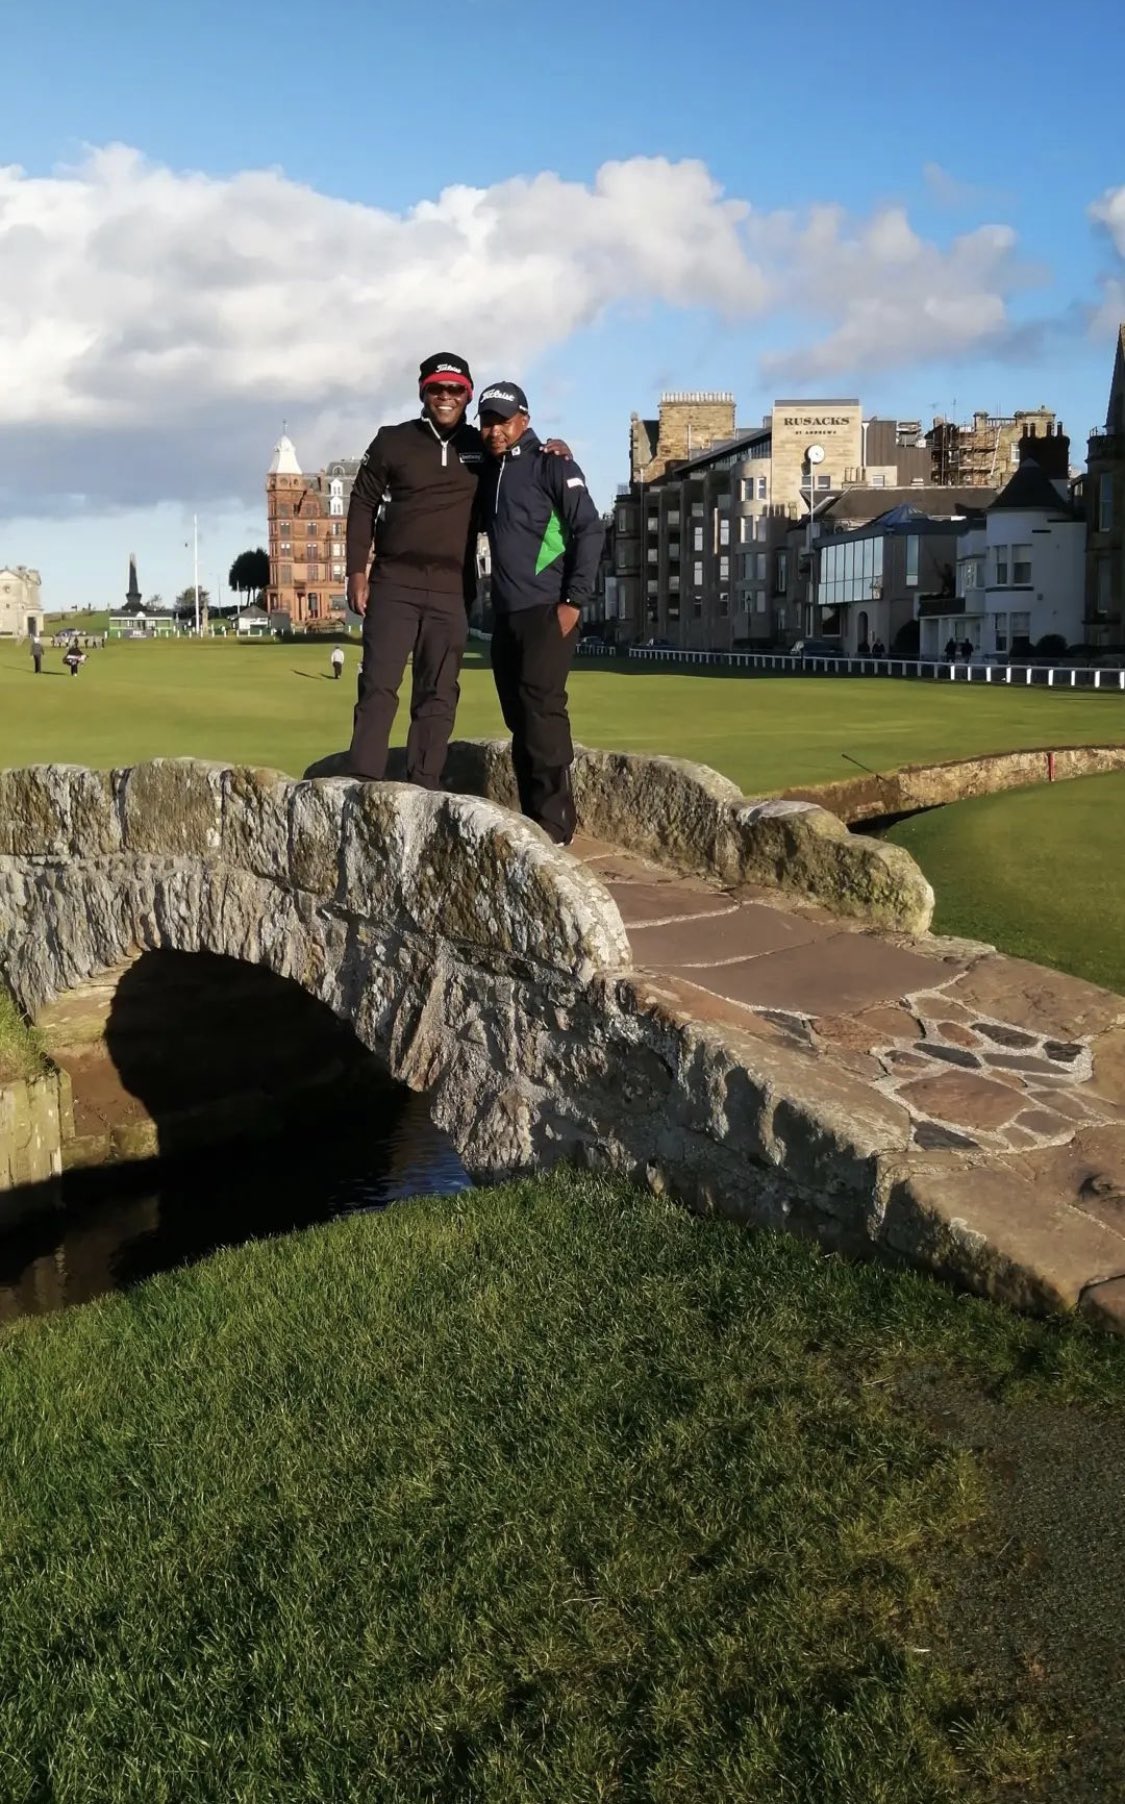 Dream come true as Thimba Jnr. tees off on St Andrewsâ€™ Old Course